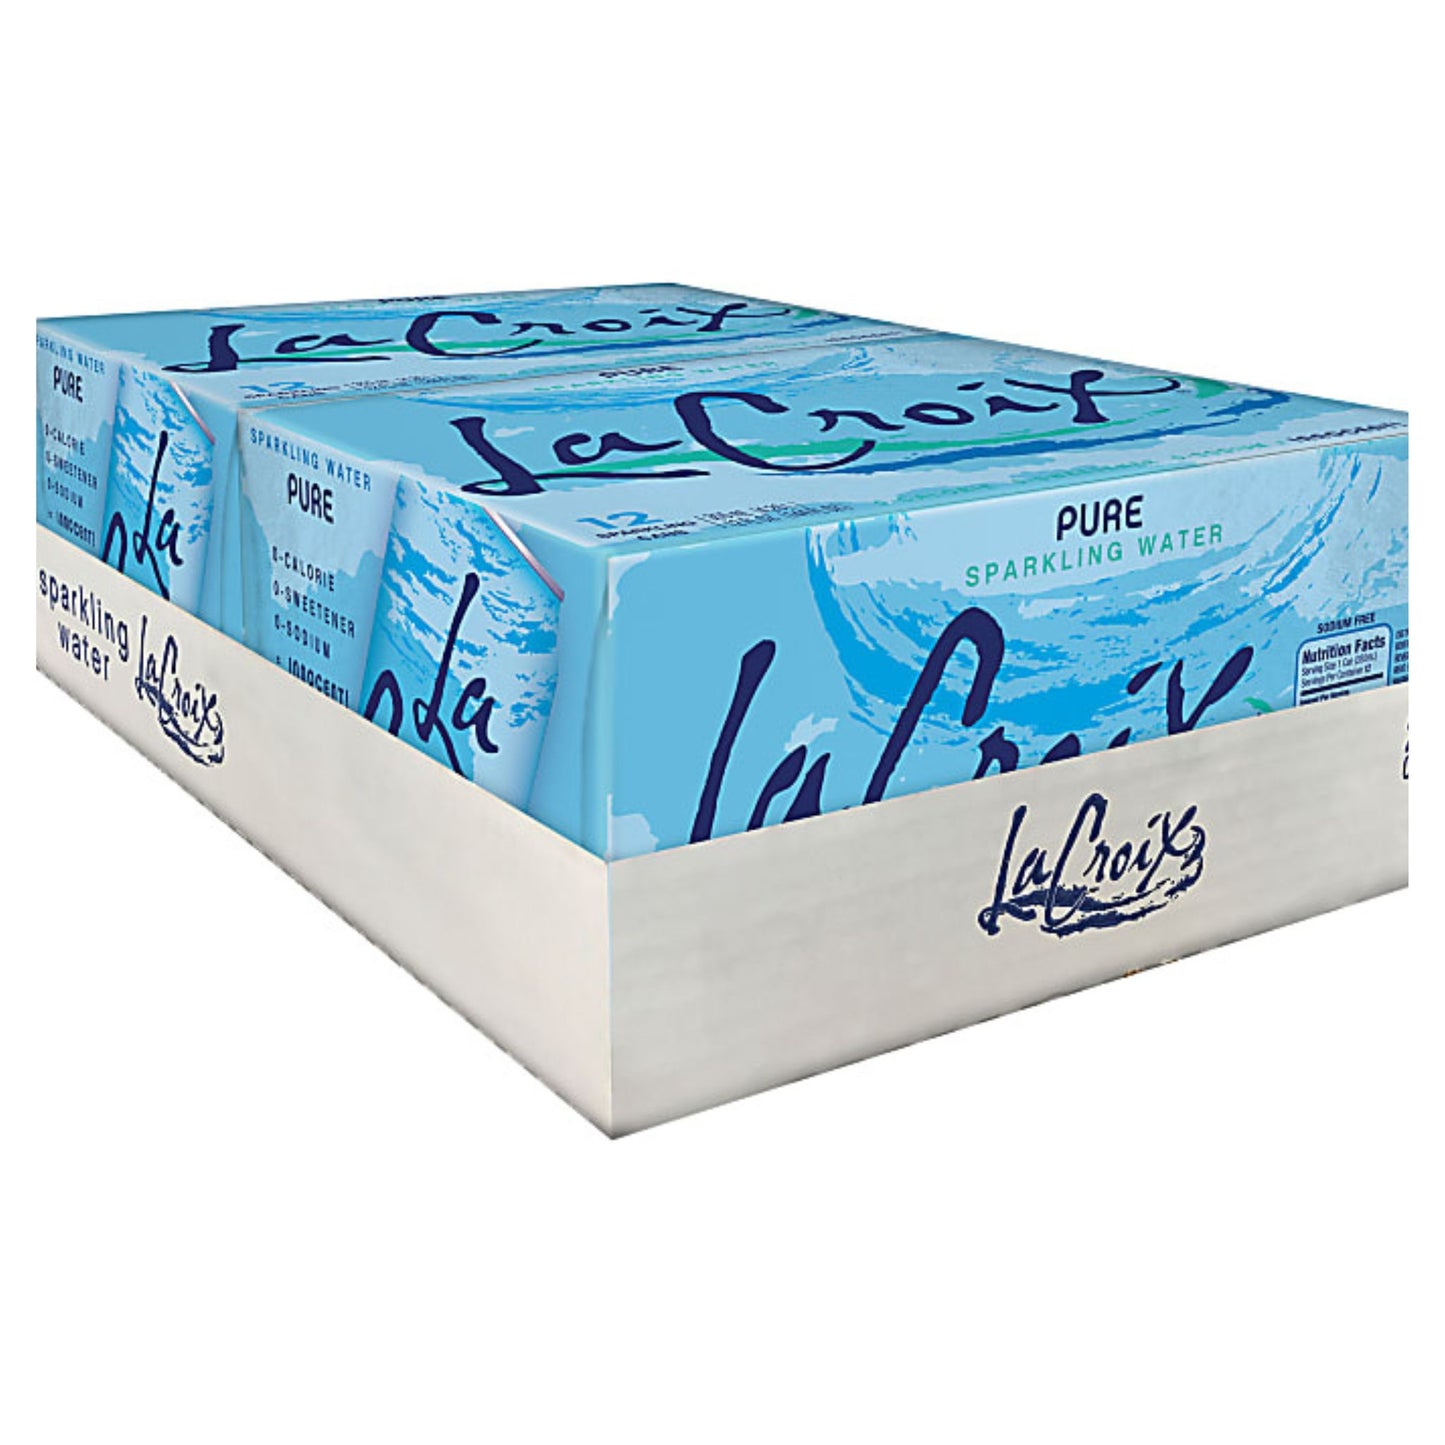 WPD LaCroix Core Sparkling Water with Natural Pure Flavor 12 Oz. Case of 24 Cans